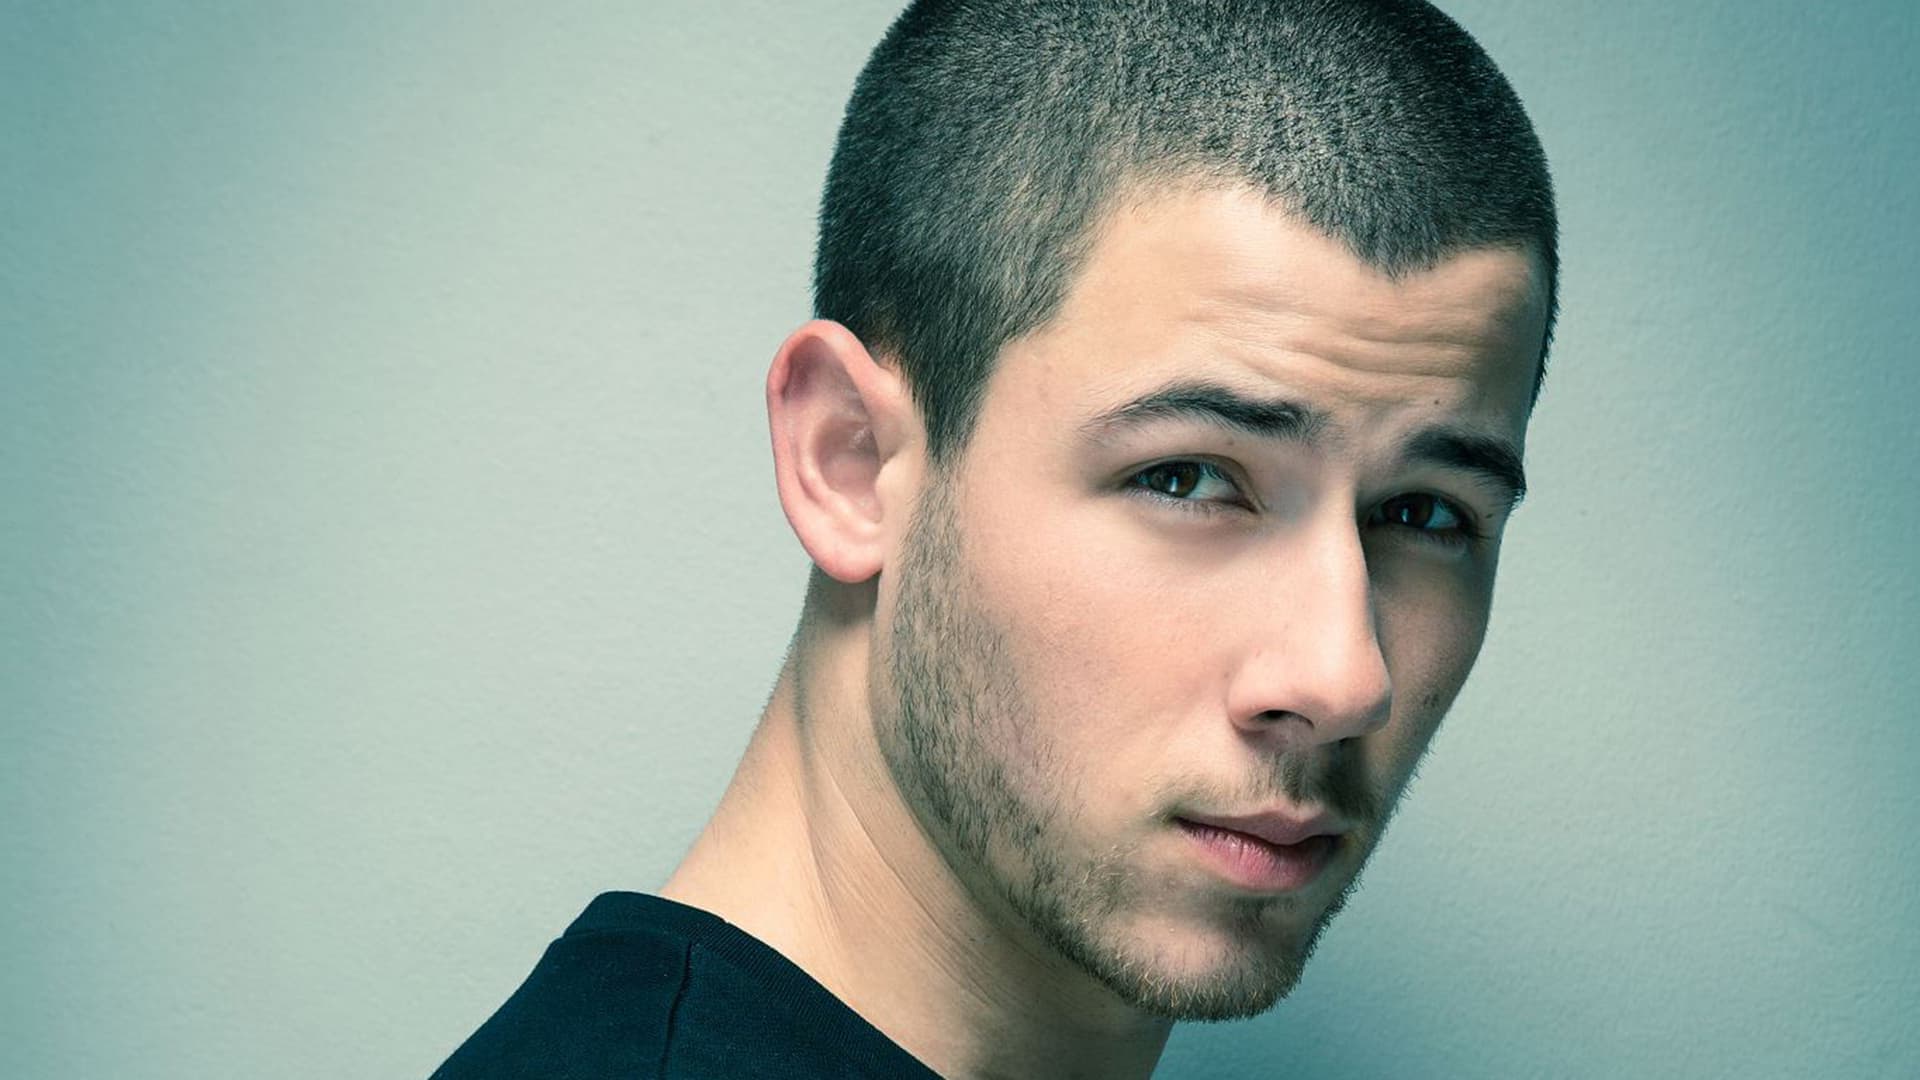 NICK JONAS KNOWS I EXIST | Life As A Junior Doctor